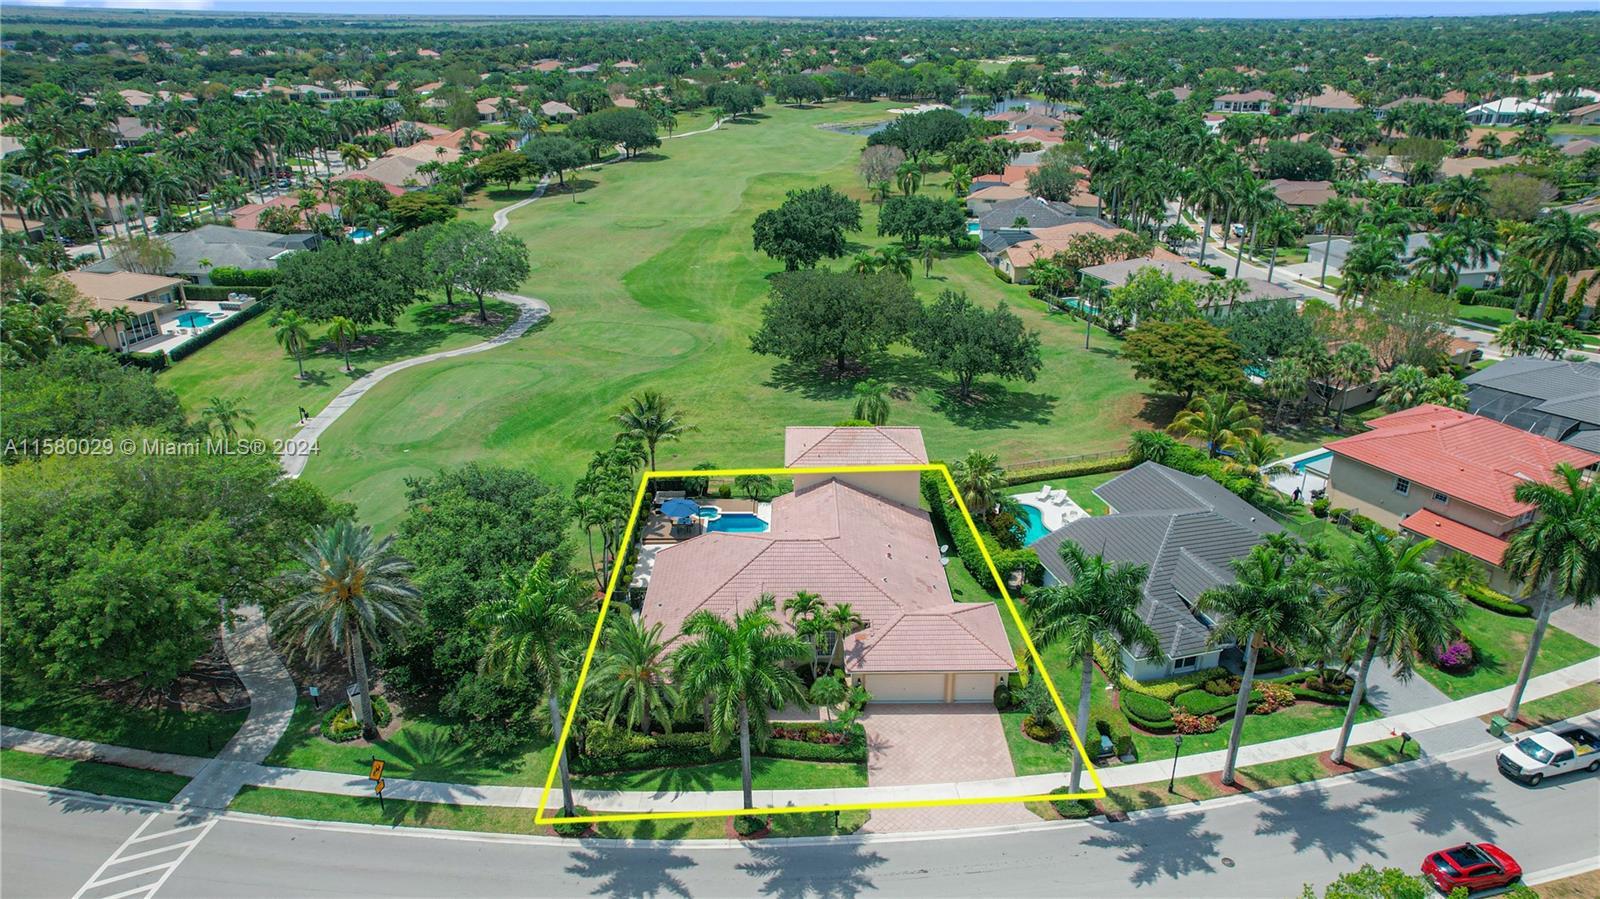 Photo of 2541 Golf View Dr in Weston, FL